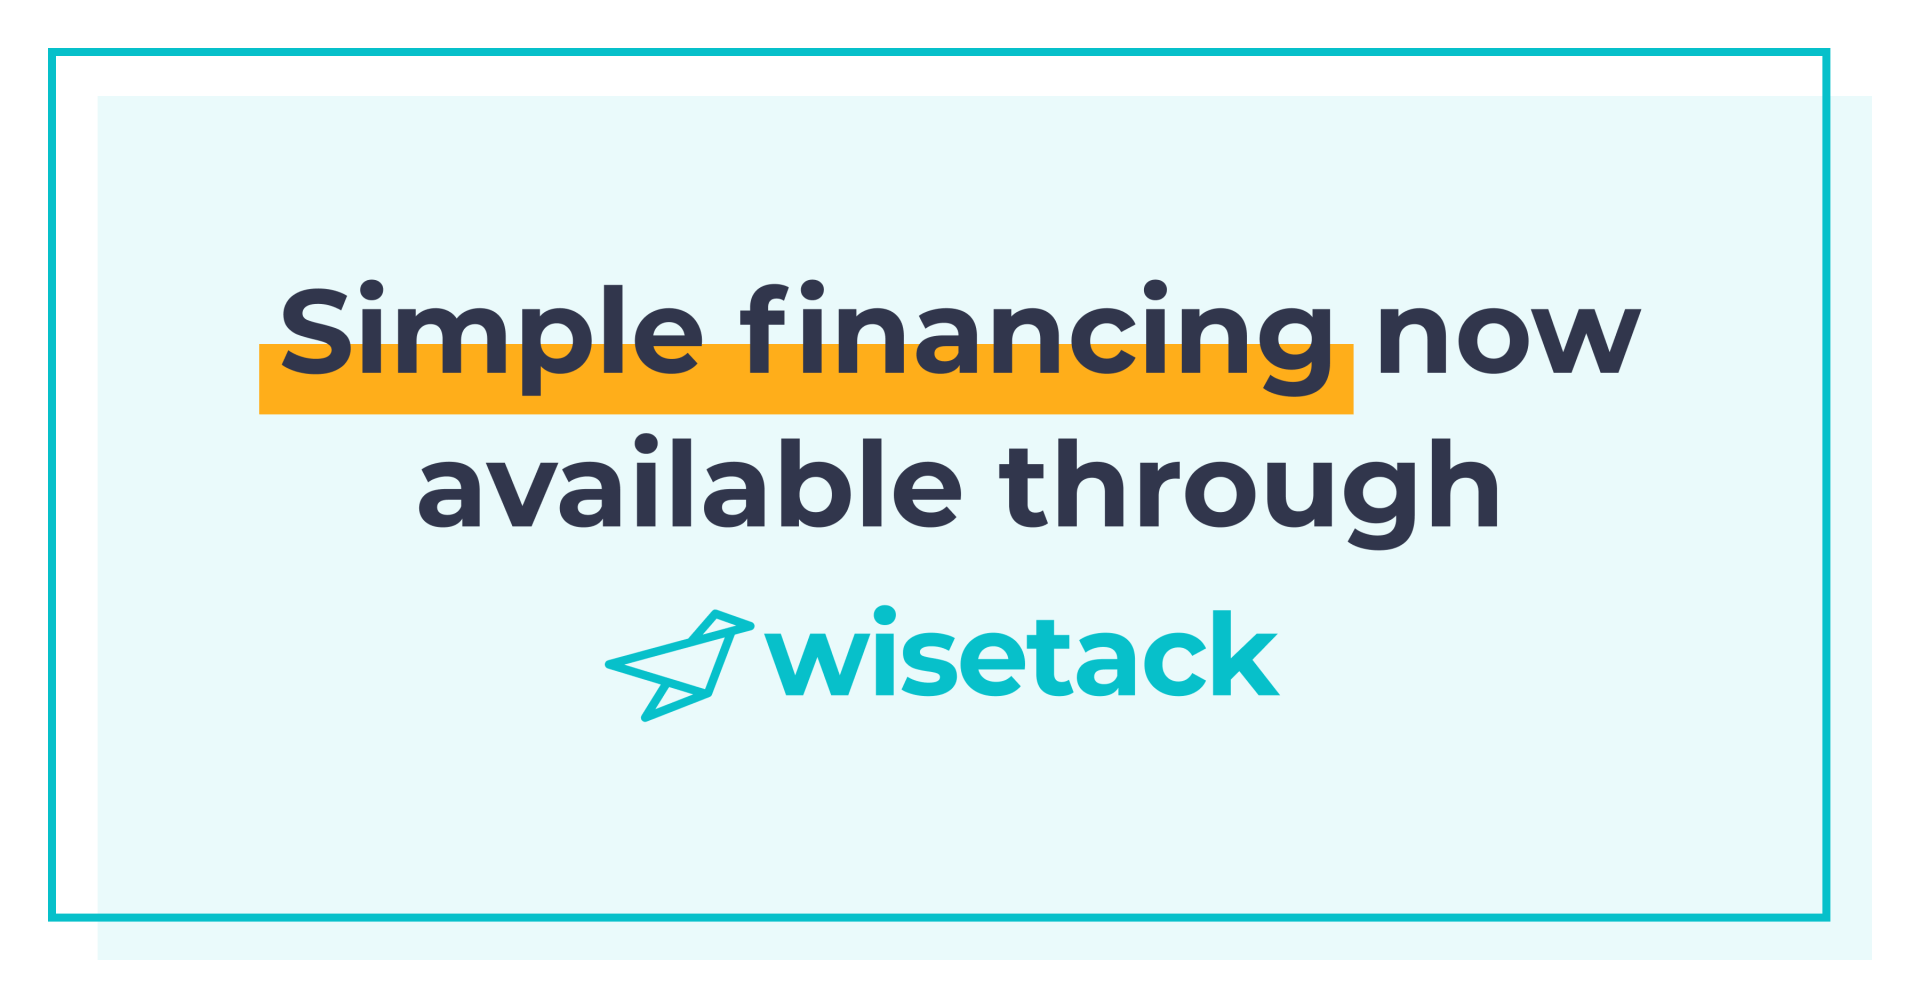 Simple financing now available through wisetack